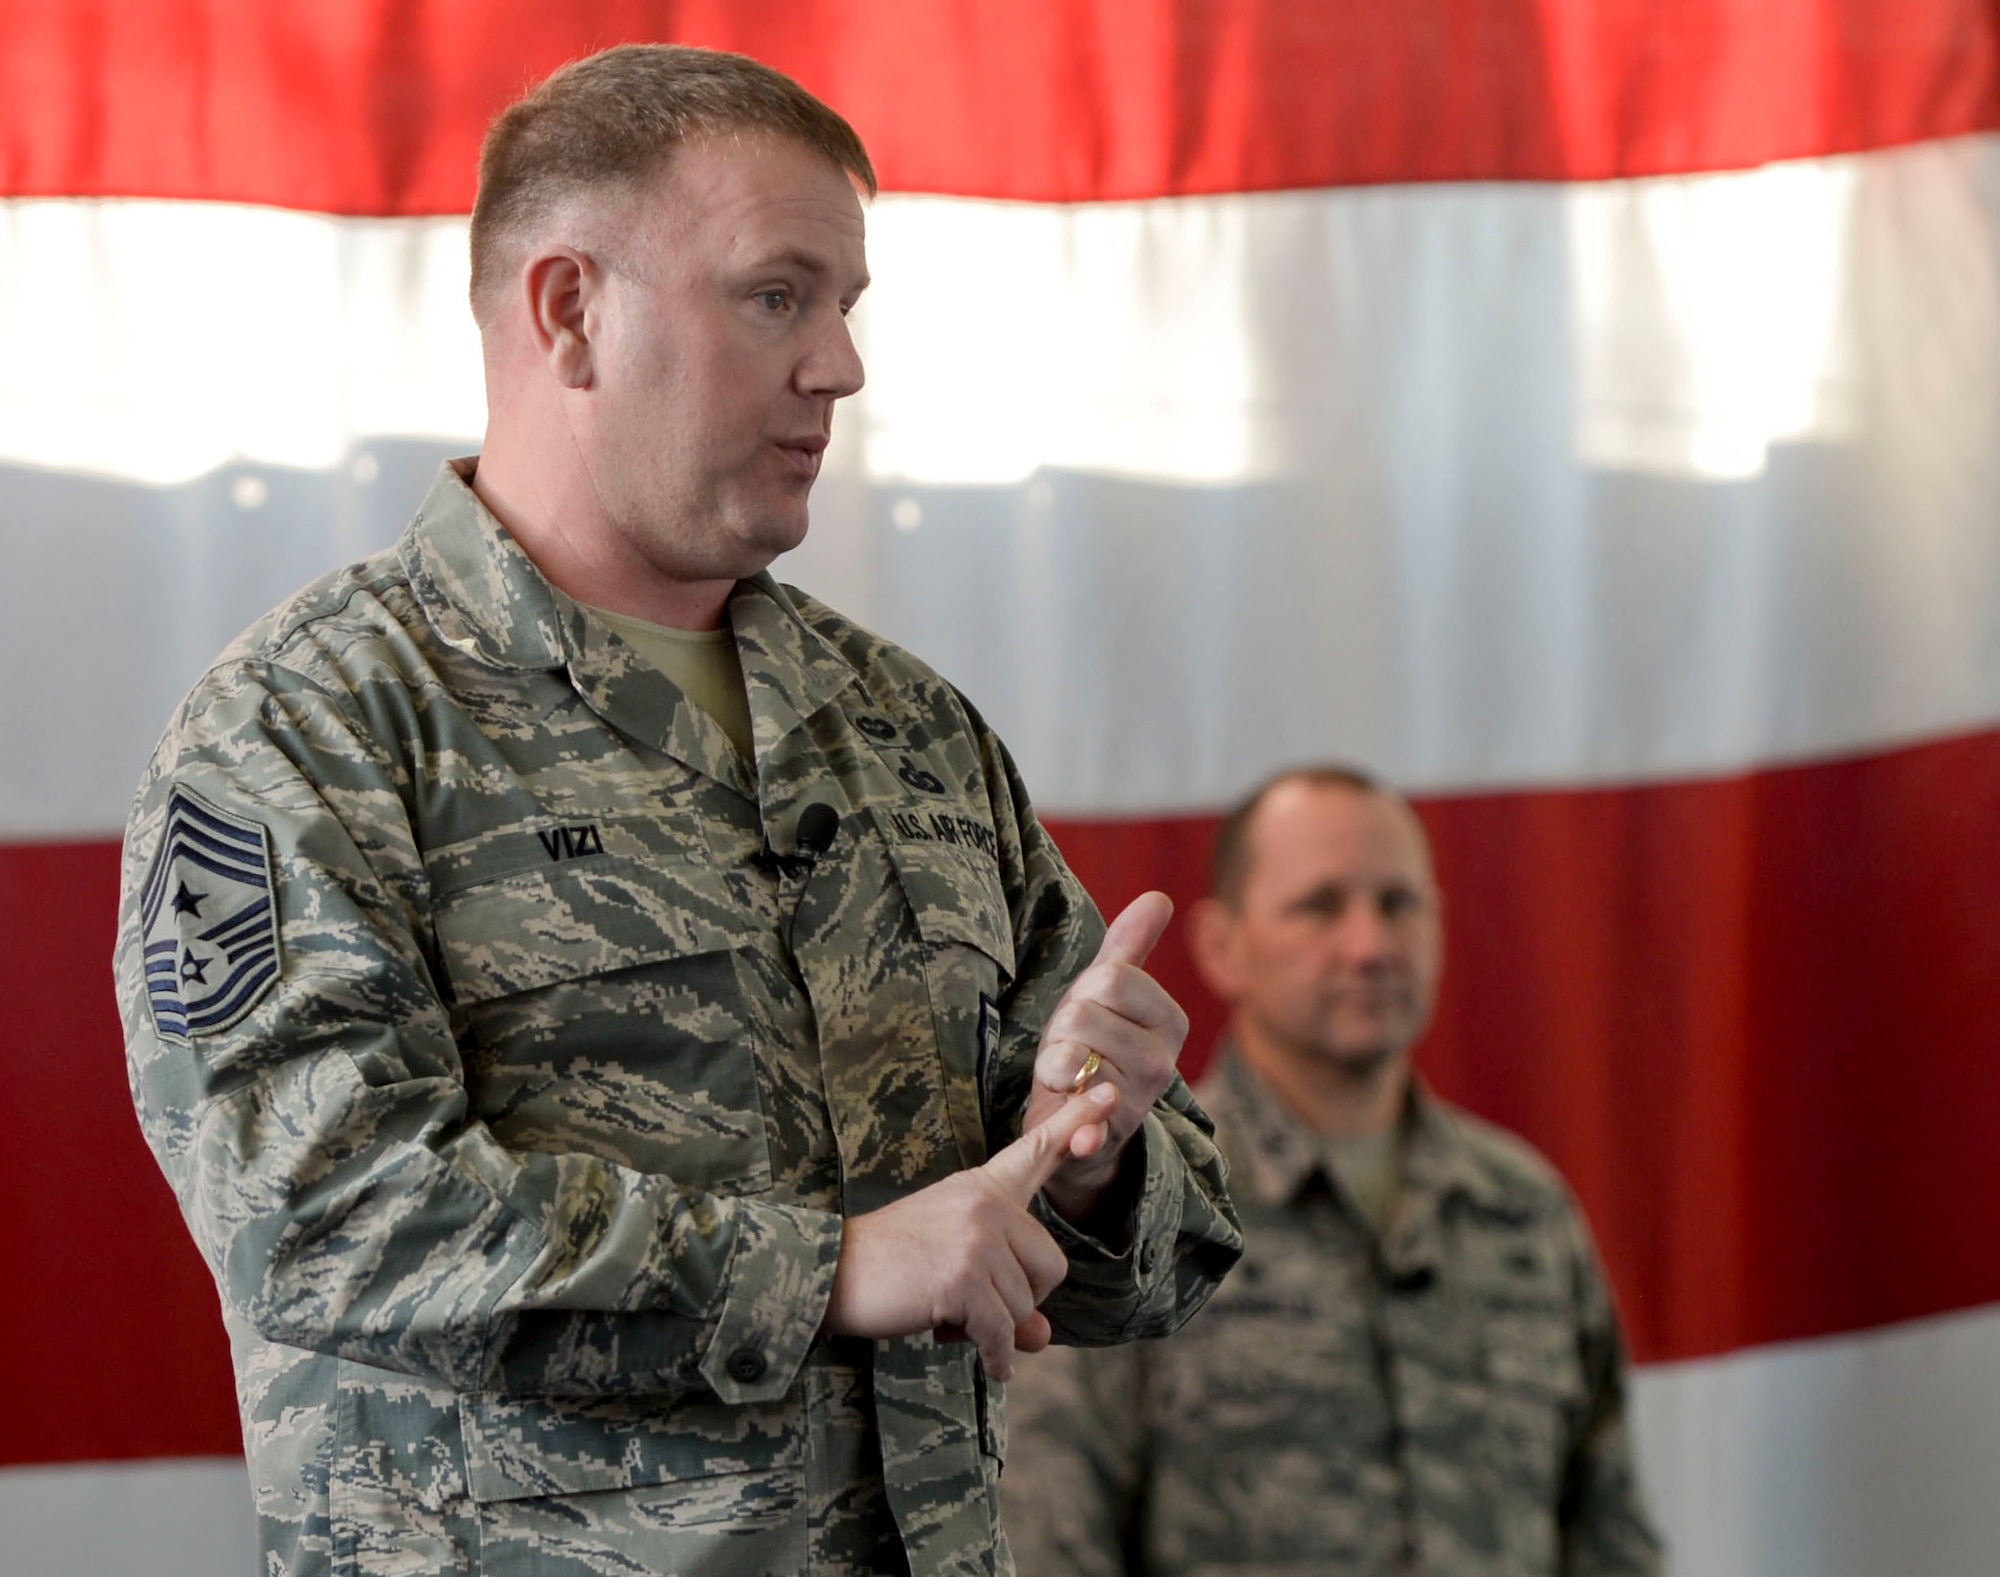 Chief Master Sgt. Adam Vizi, command chief of the 28th Bomb Wing, speaks at his first all-call as Ellsworth’s command chief inside the Pride Hangar on Jan. 3, 2017. During the first all-call of the year, Vizi and Col. Gentry Boswell, the commander of the 28th BW, discussed how the Air Force is tackling manning and funding issues as well as focusing on the importance of developing squadrons as the building block of the Air Force. (U.S. Air Force photo by Airman 1st Class Randahl J. Jenson)